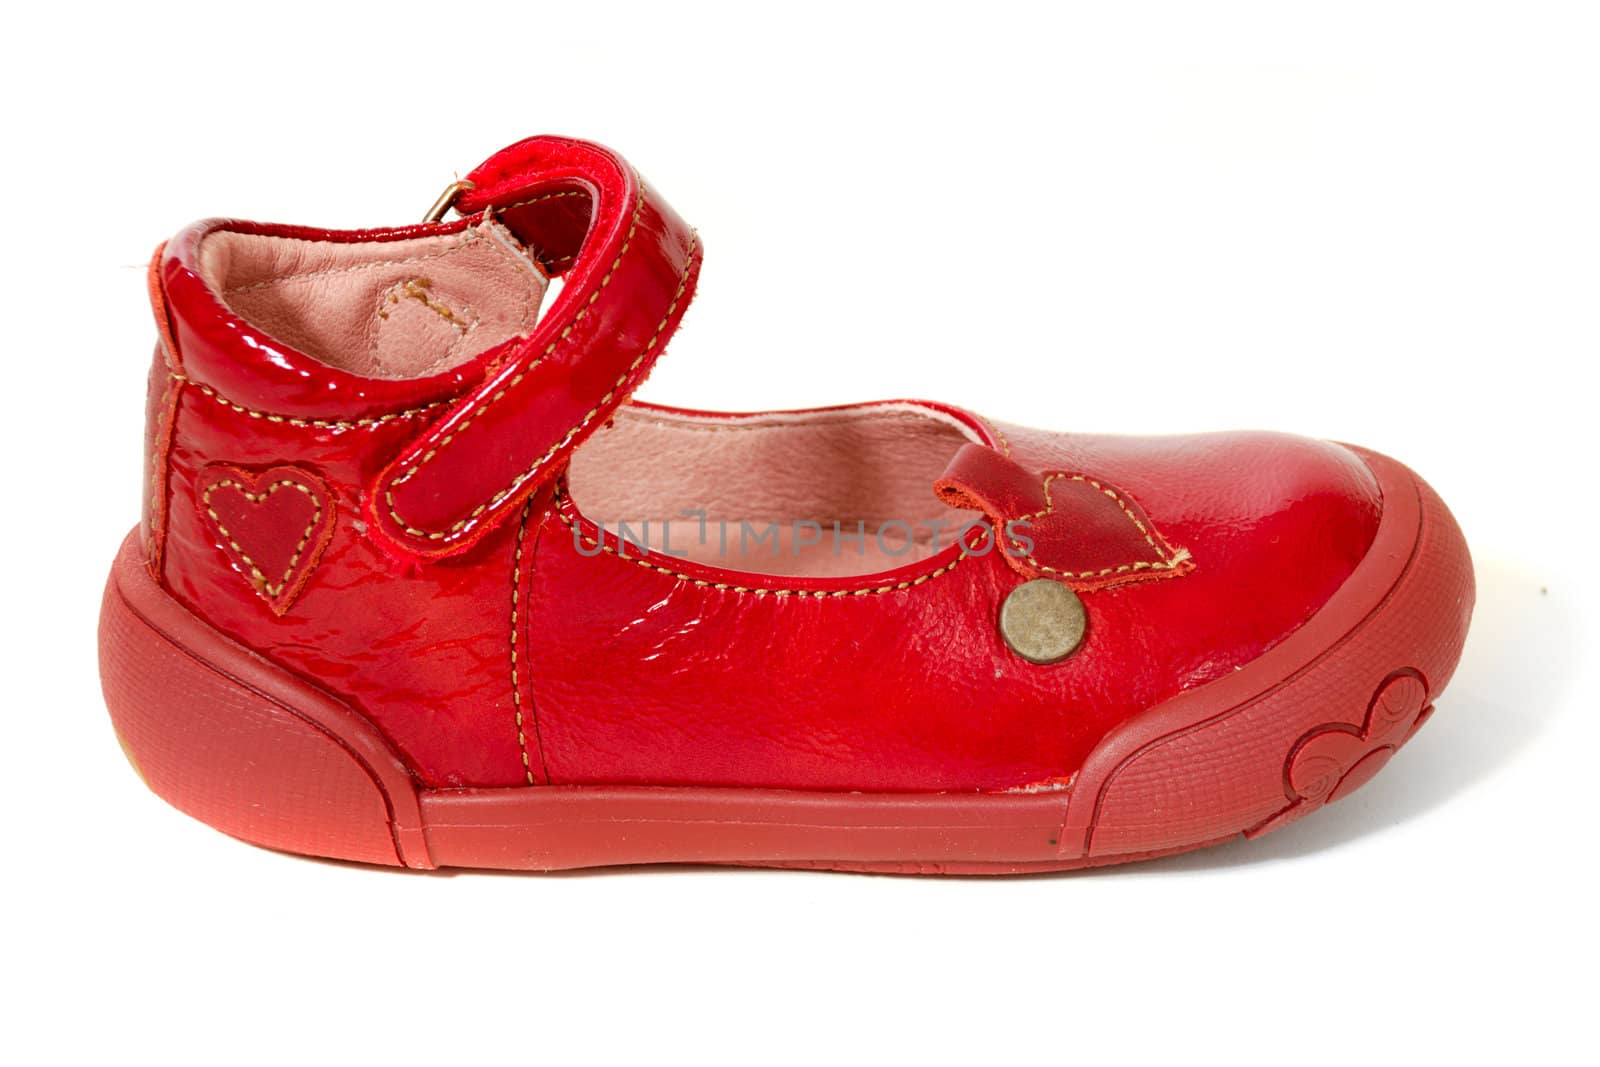 A red childs shoe. Taken on a clean white background.